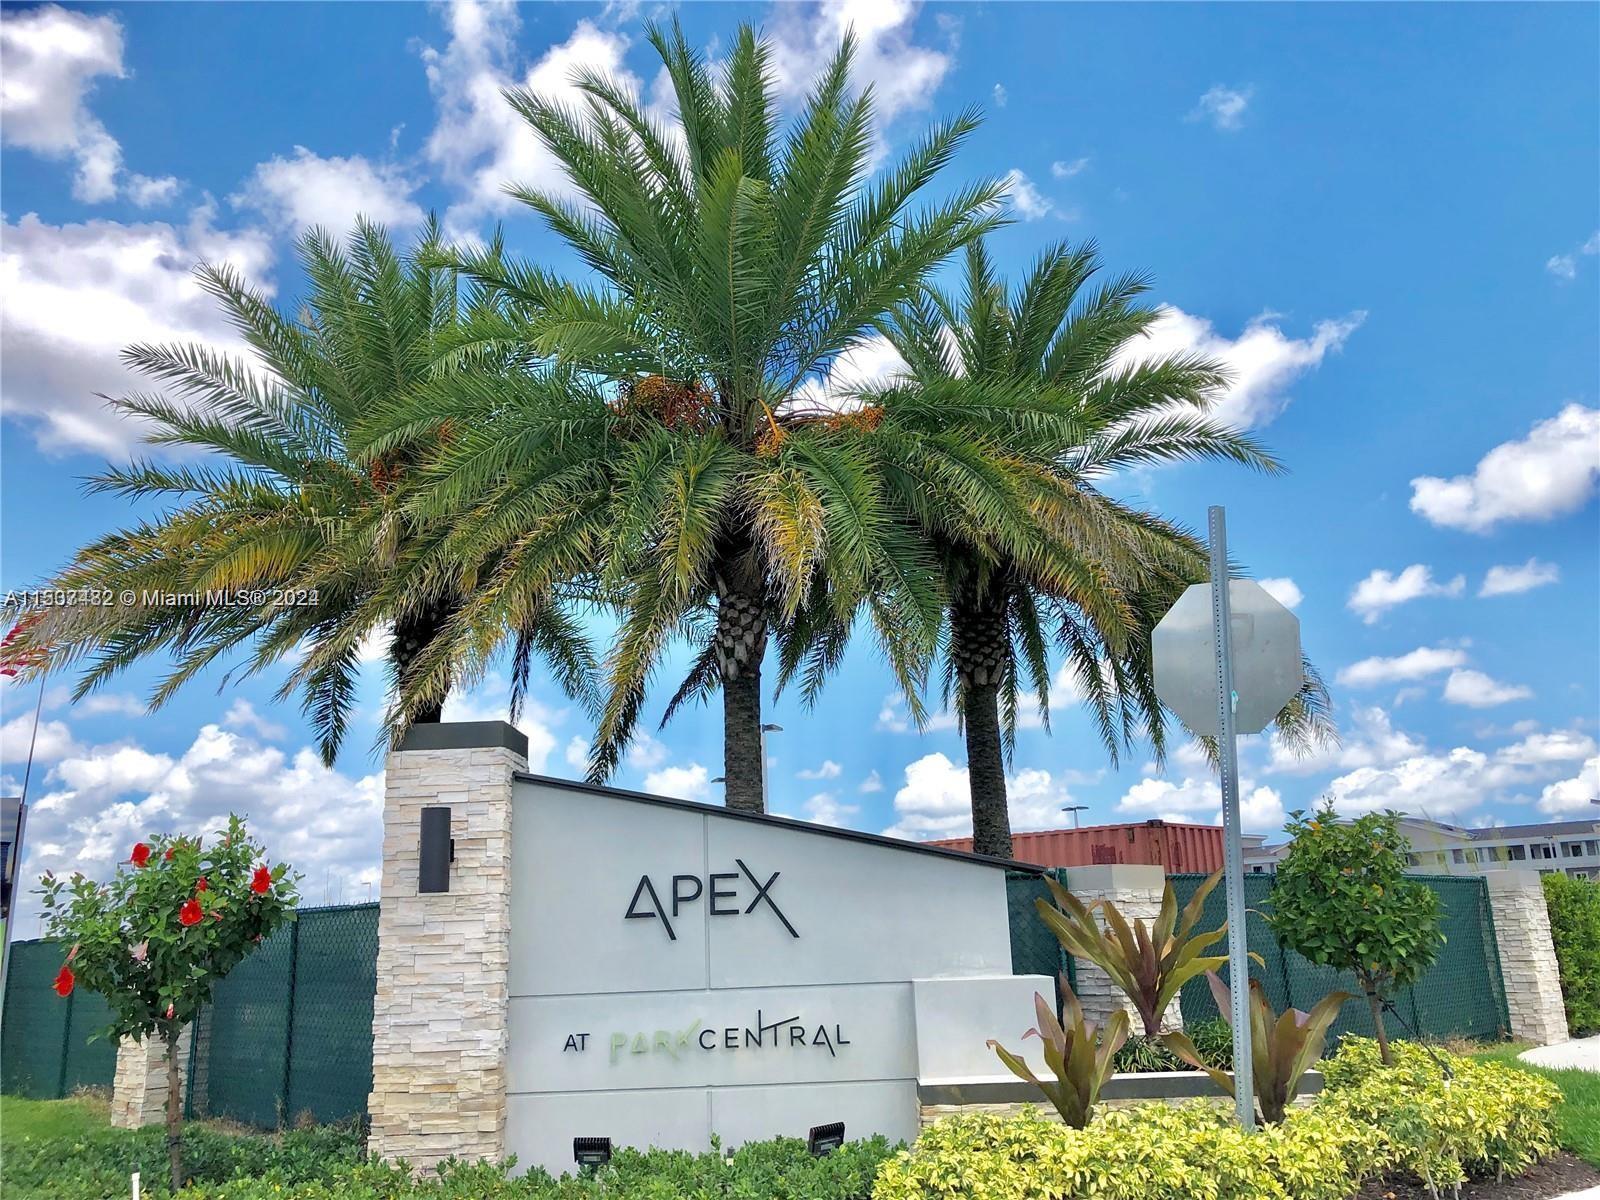 IMMACULATE AND FULLY REMODELED UNIT AT THE APEX DORAL! 2 BED, 2.5 BATH. TWO ENSUITE BEDROOMS PLUS PO